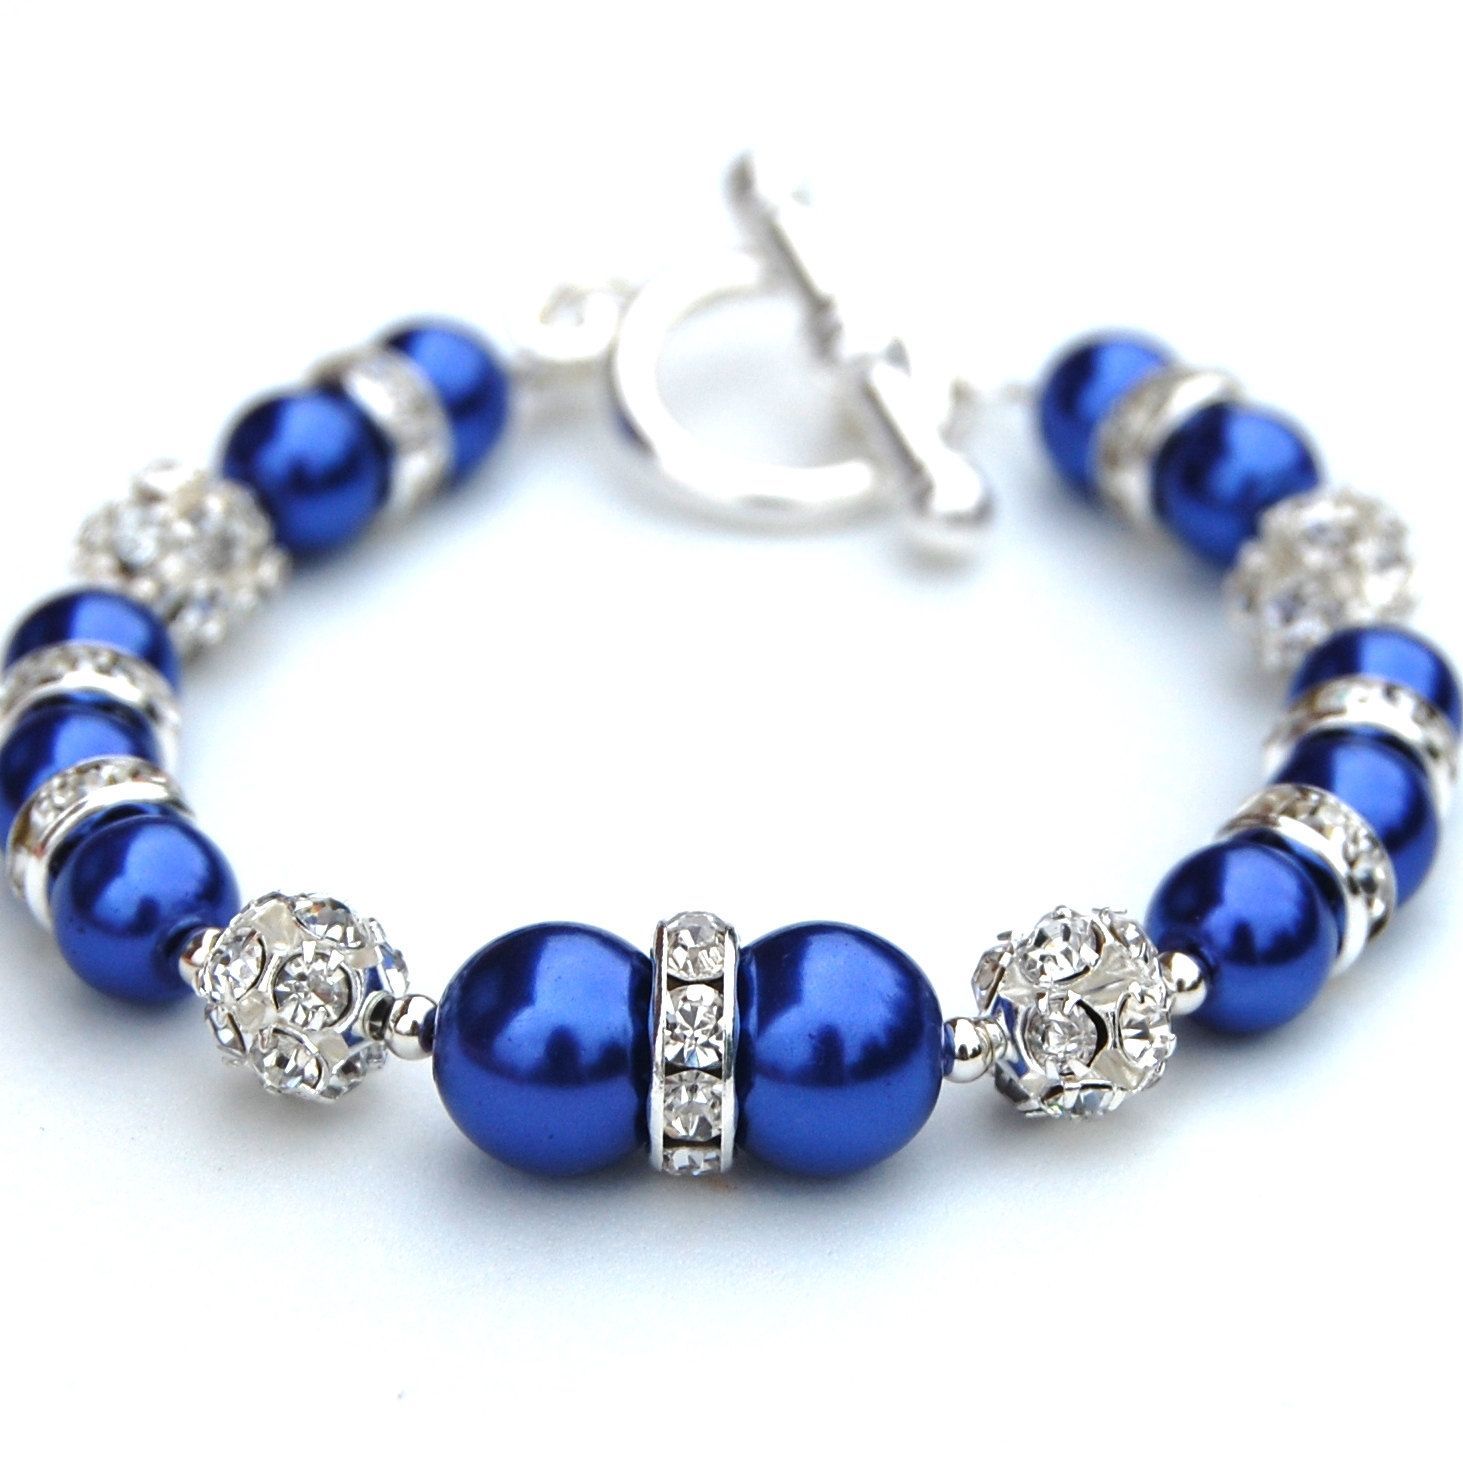 blue jewelry | Sparkling Cobalt Blue Pearl Bracelet, Bling Jewelry, Party Accessory …